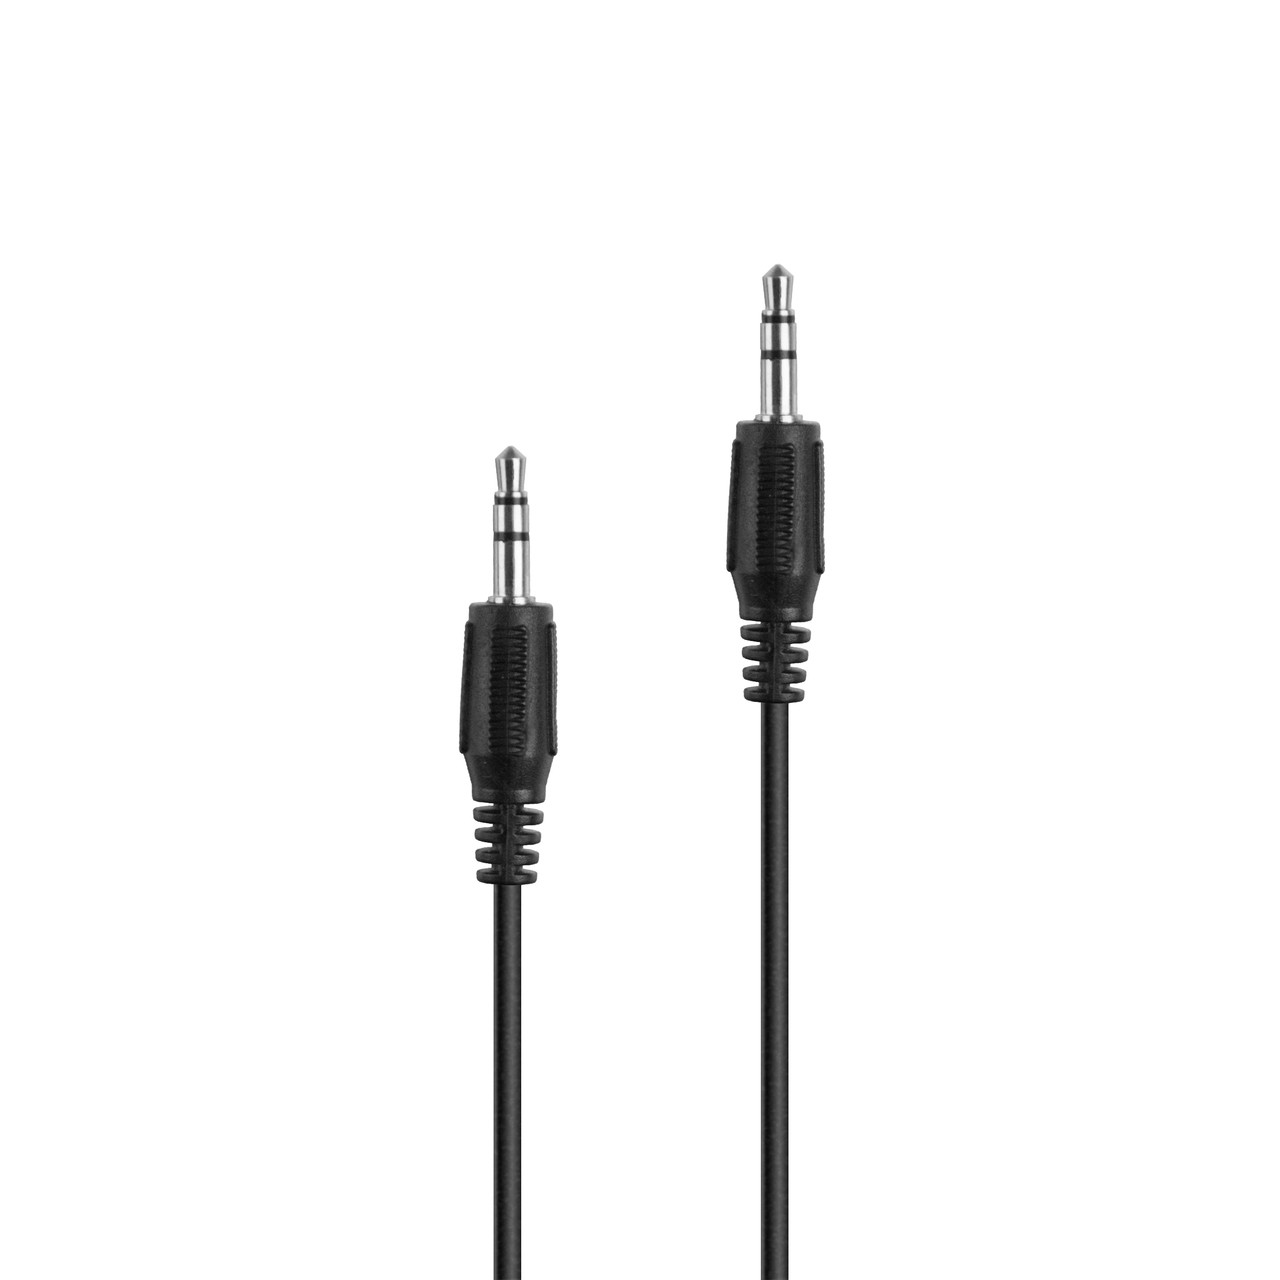 Audio Cable – Everything You Need To Know